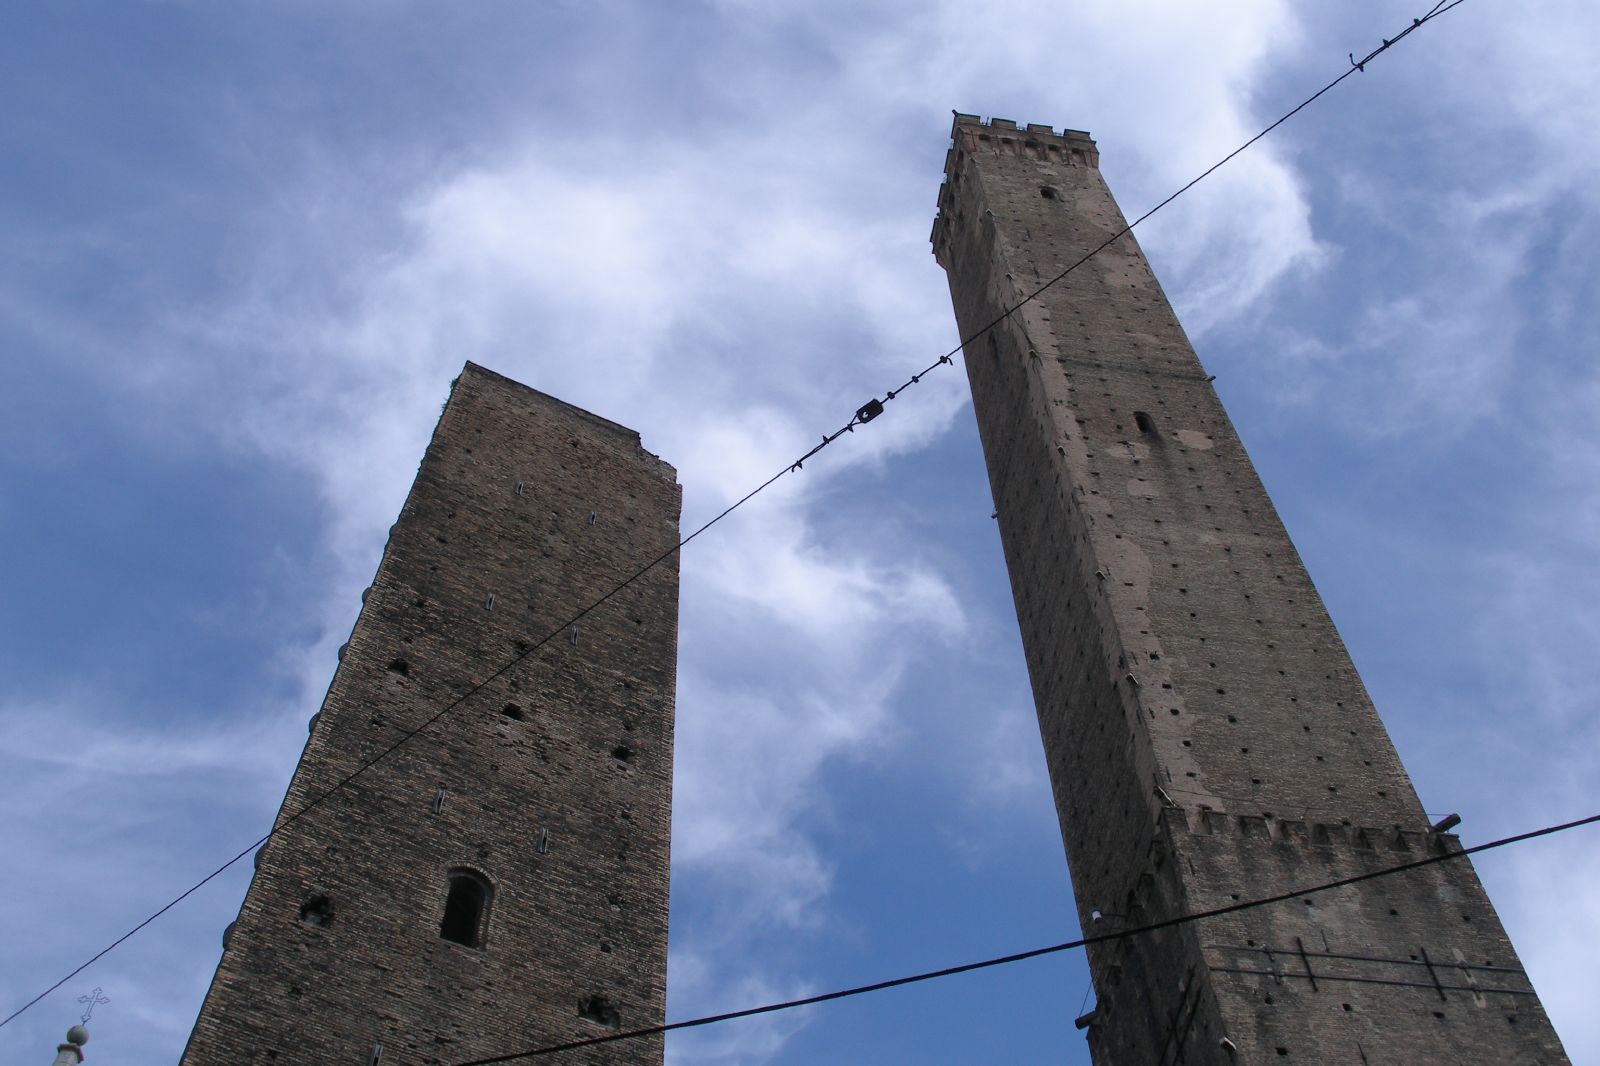 two tall brick buildings in the air, with power lines behind